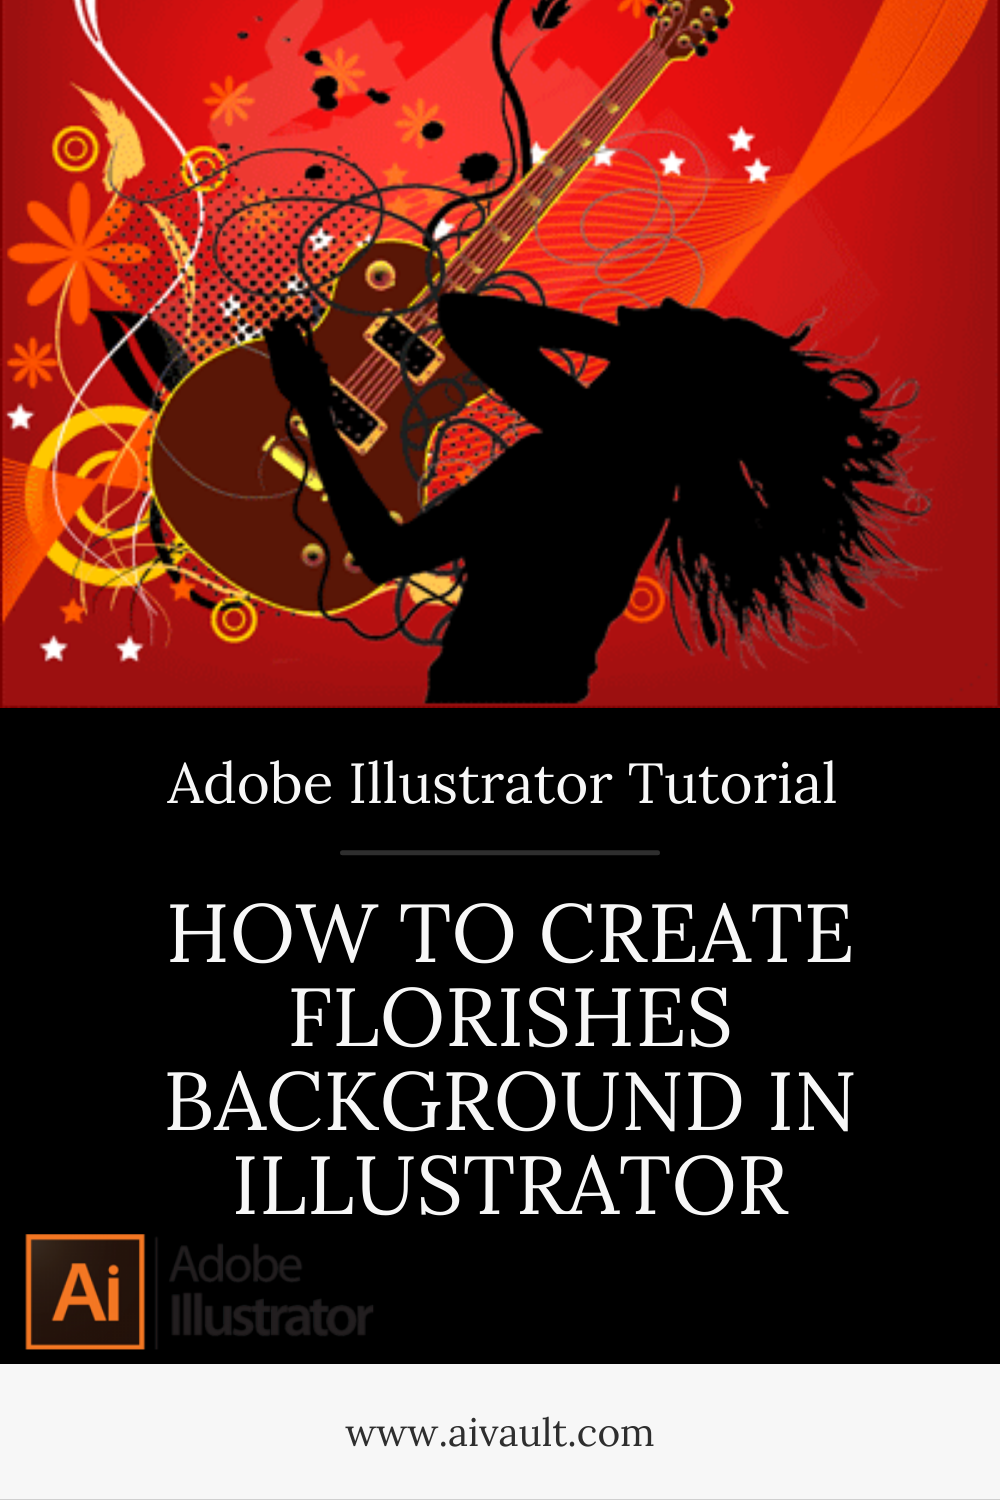 How to make funky illustrative backgrounds and florishes